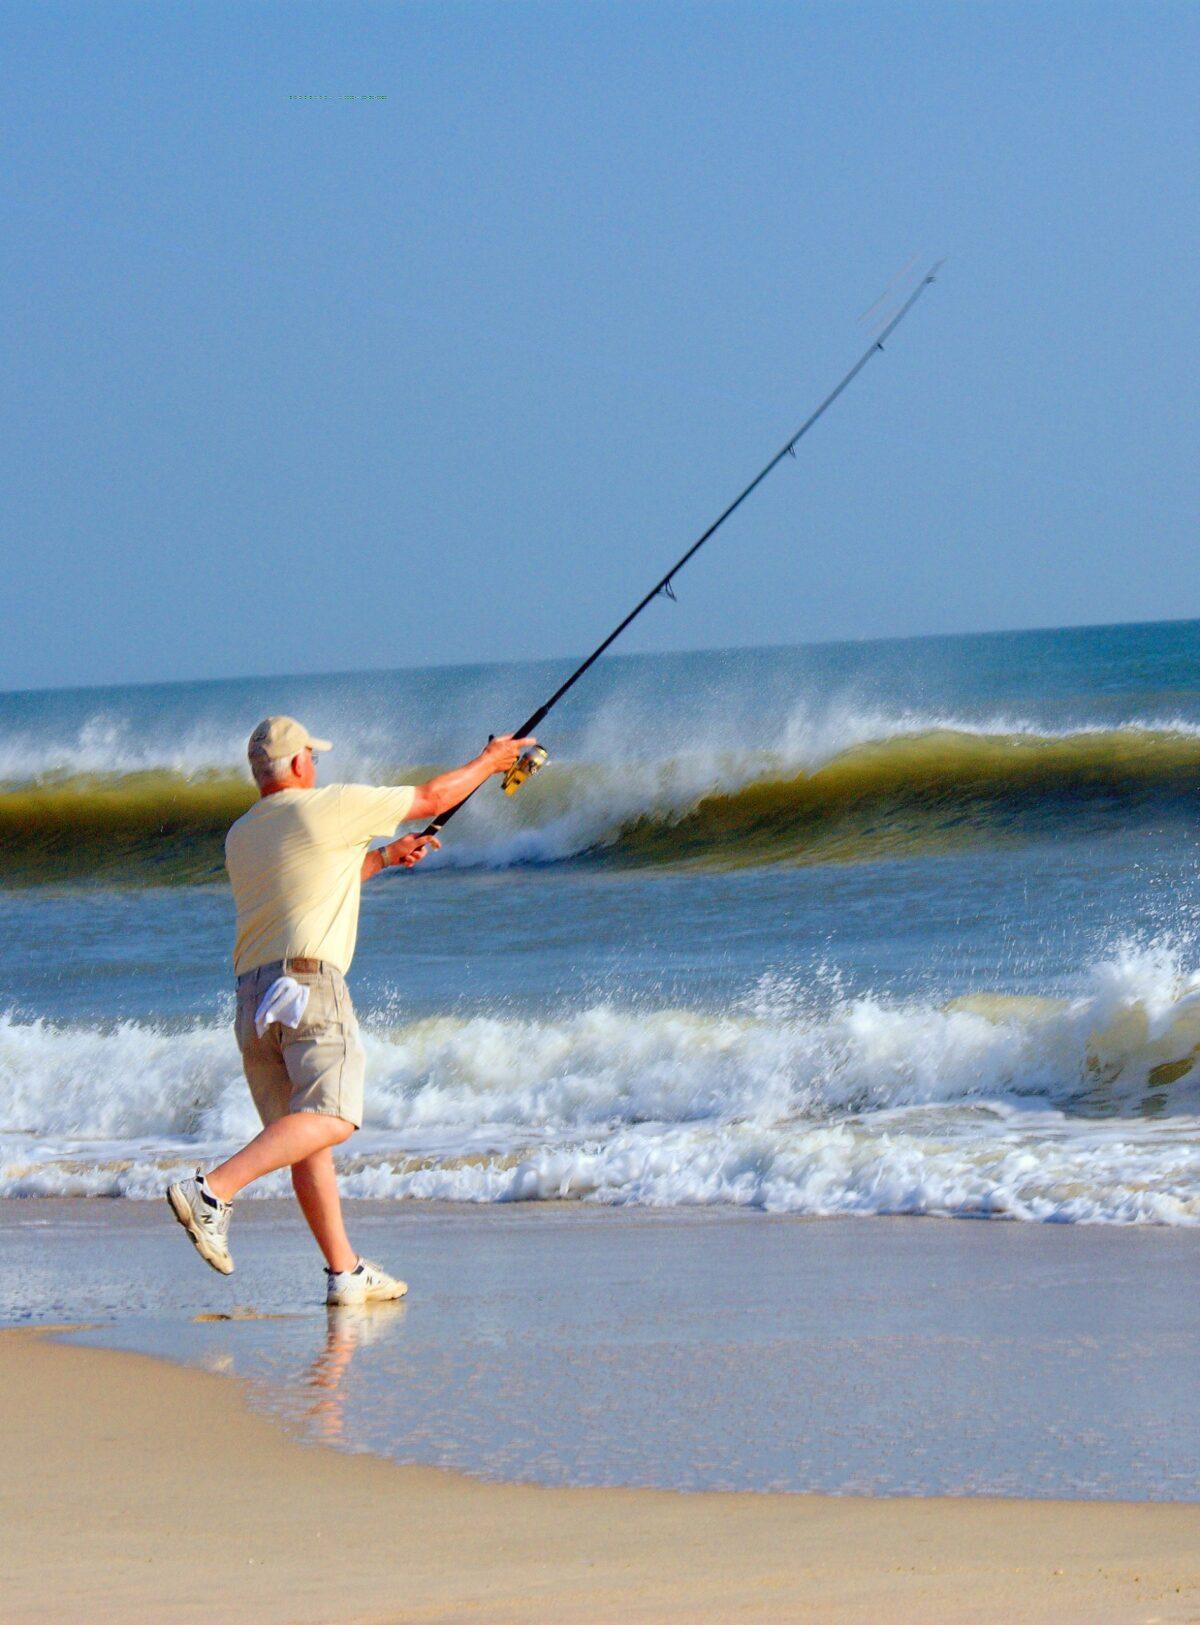 Surf fishing is popular in the Outer Banks. (Copyright Fred J. Eckert)